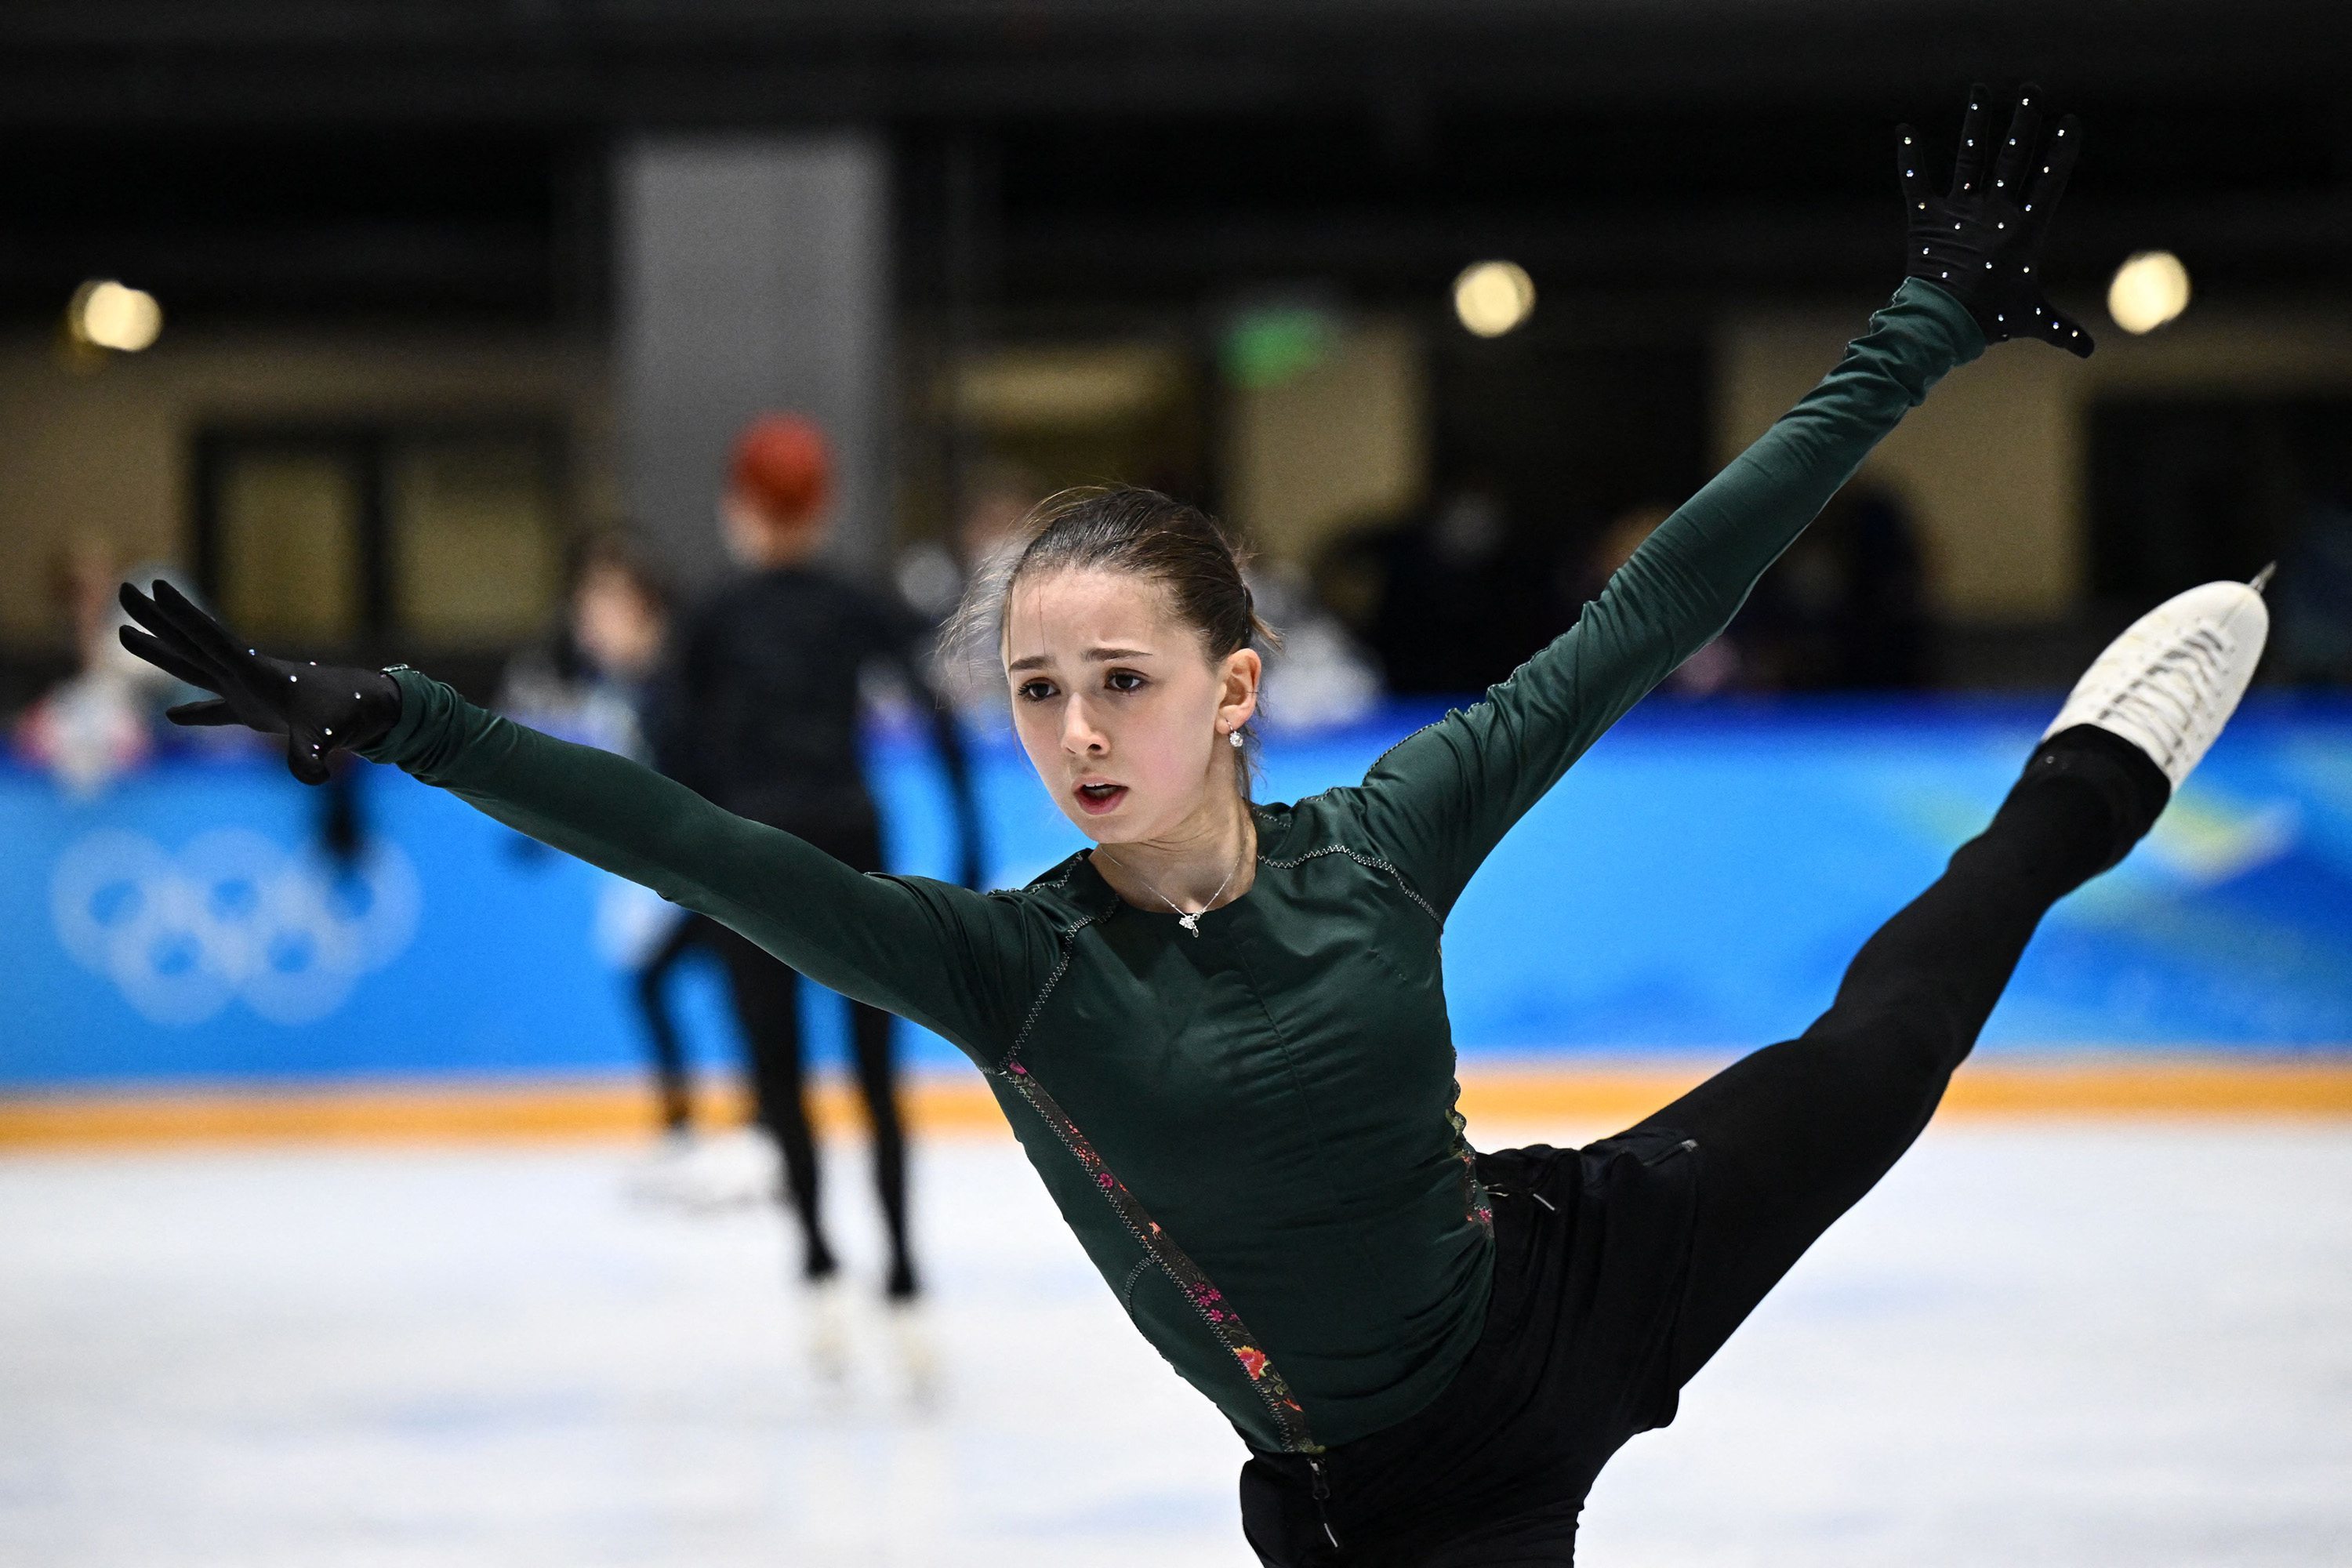 Kamila Valieva in NBC Winter Olympics figure skating schedule on TV and streaming for Tuesday, February 15